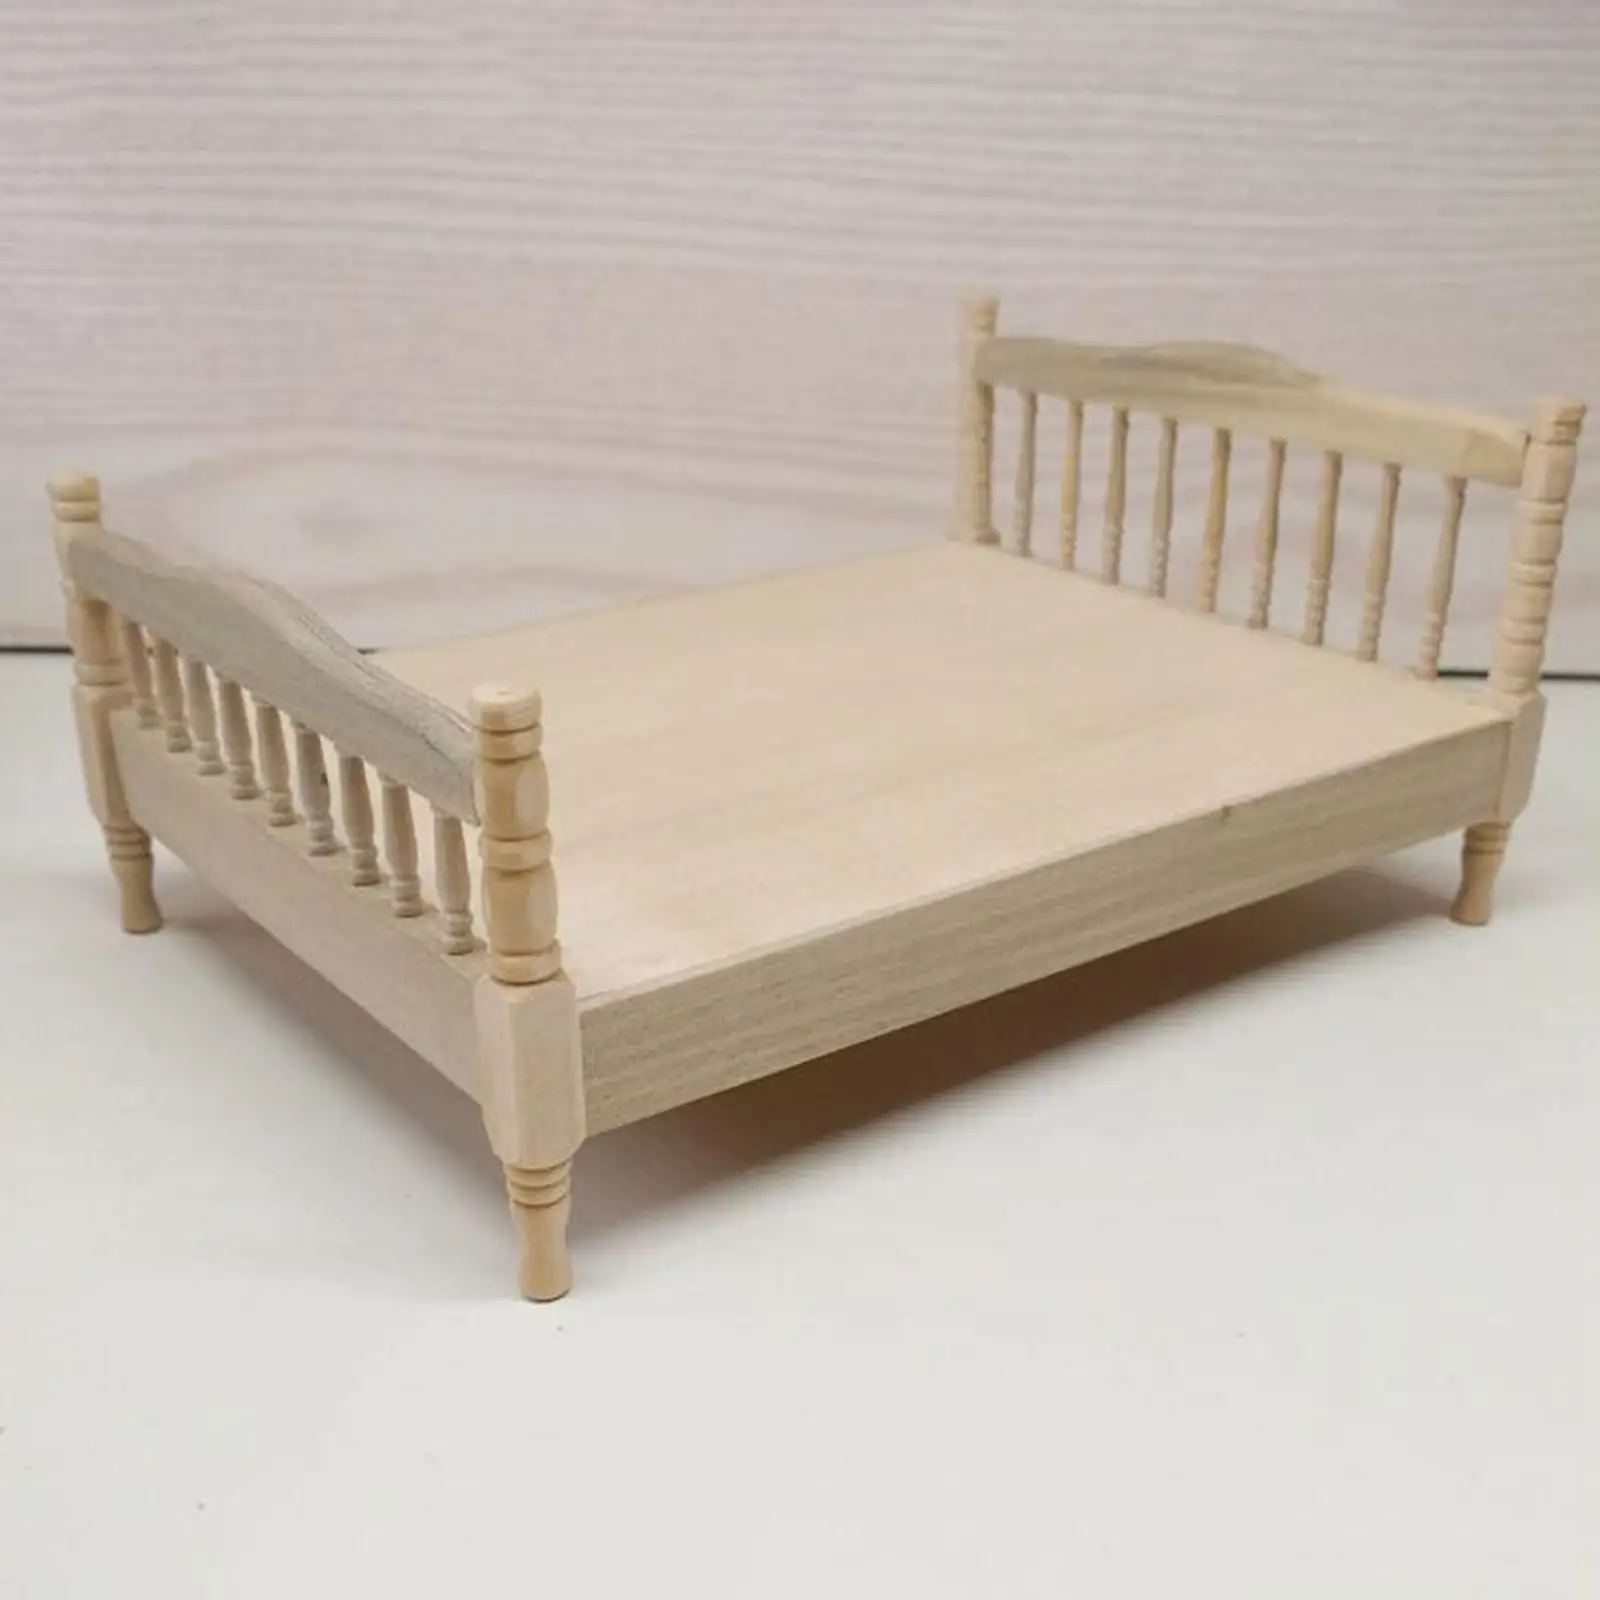 1:12 European Double Bed Craft Wooden Mini Bed for Architectural Railway Station Fairy Garden Micro Landscape Accessories